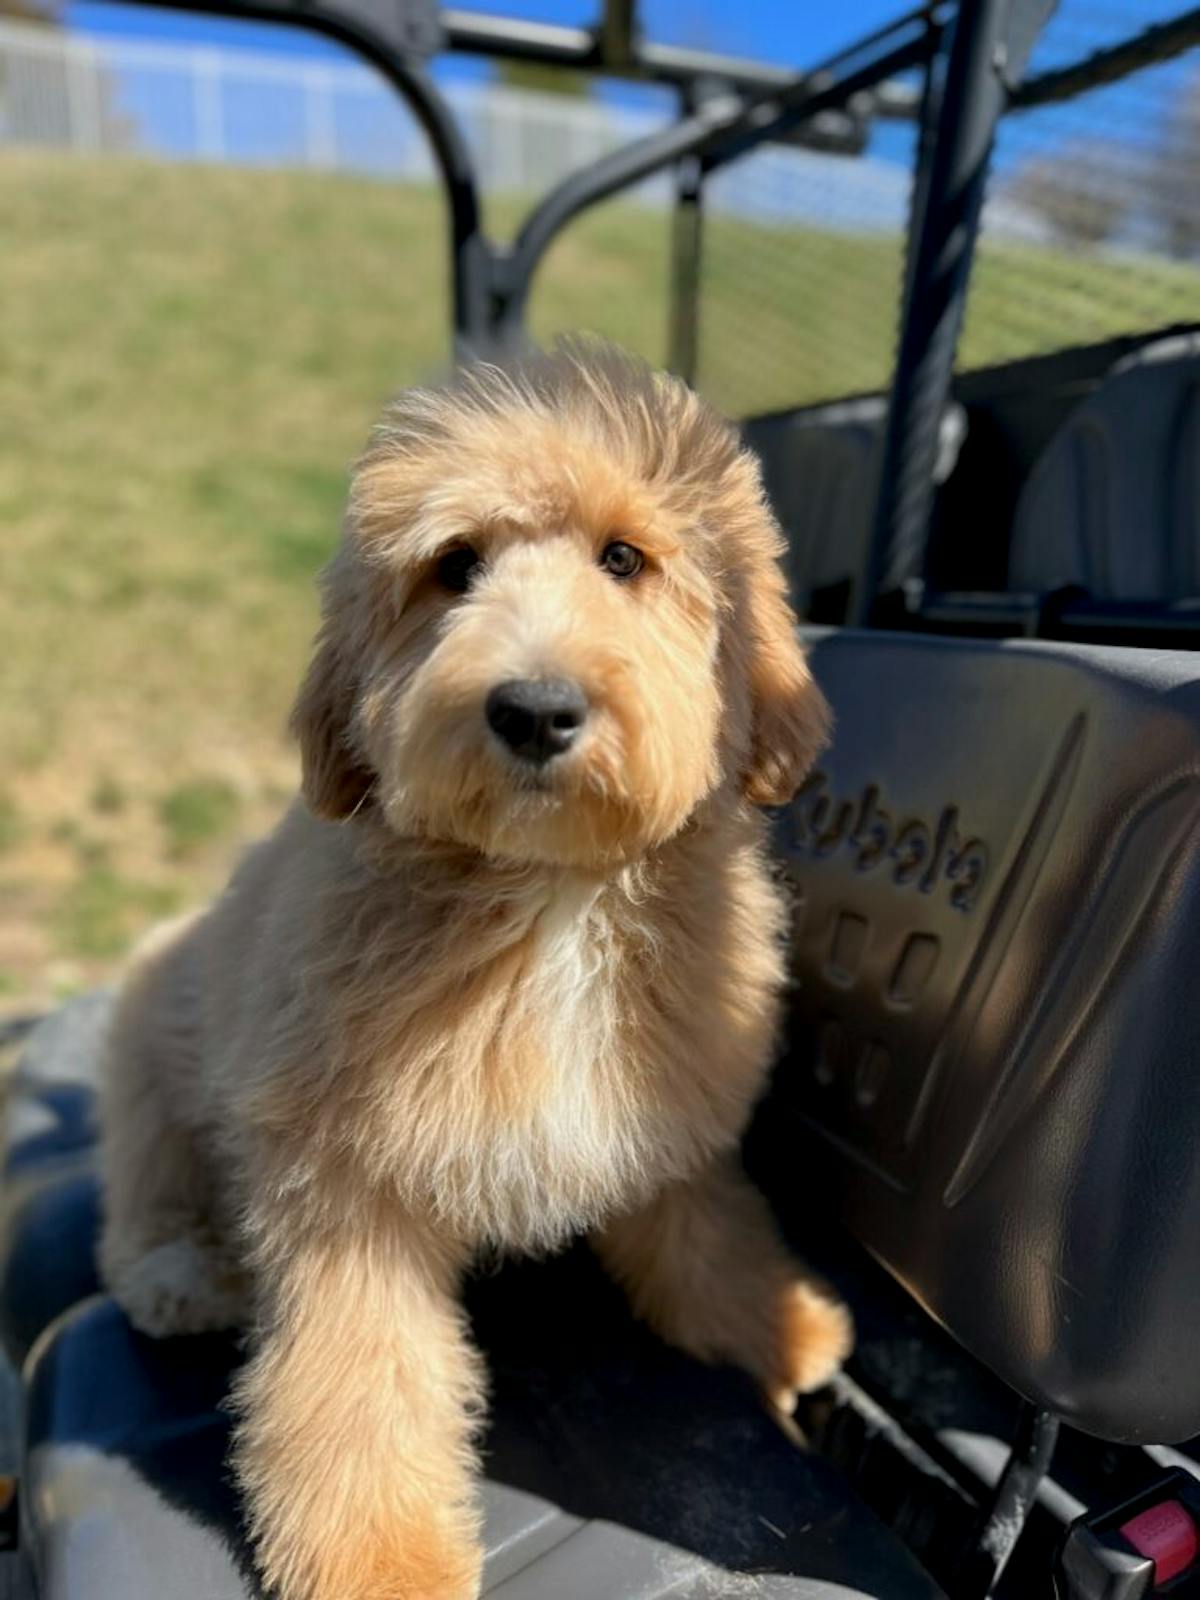 All About English Goldendoodle Puppies: Your Go-To Guide